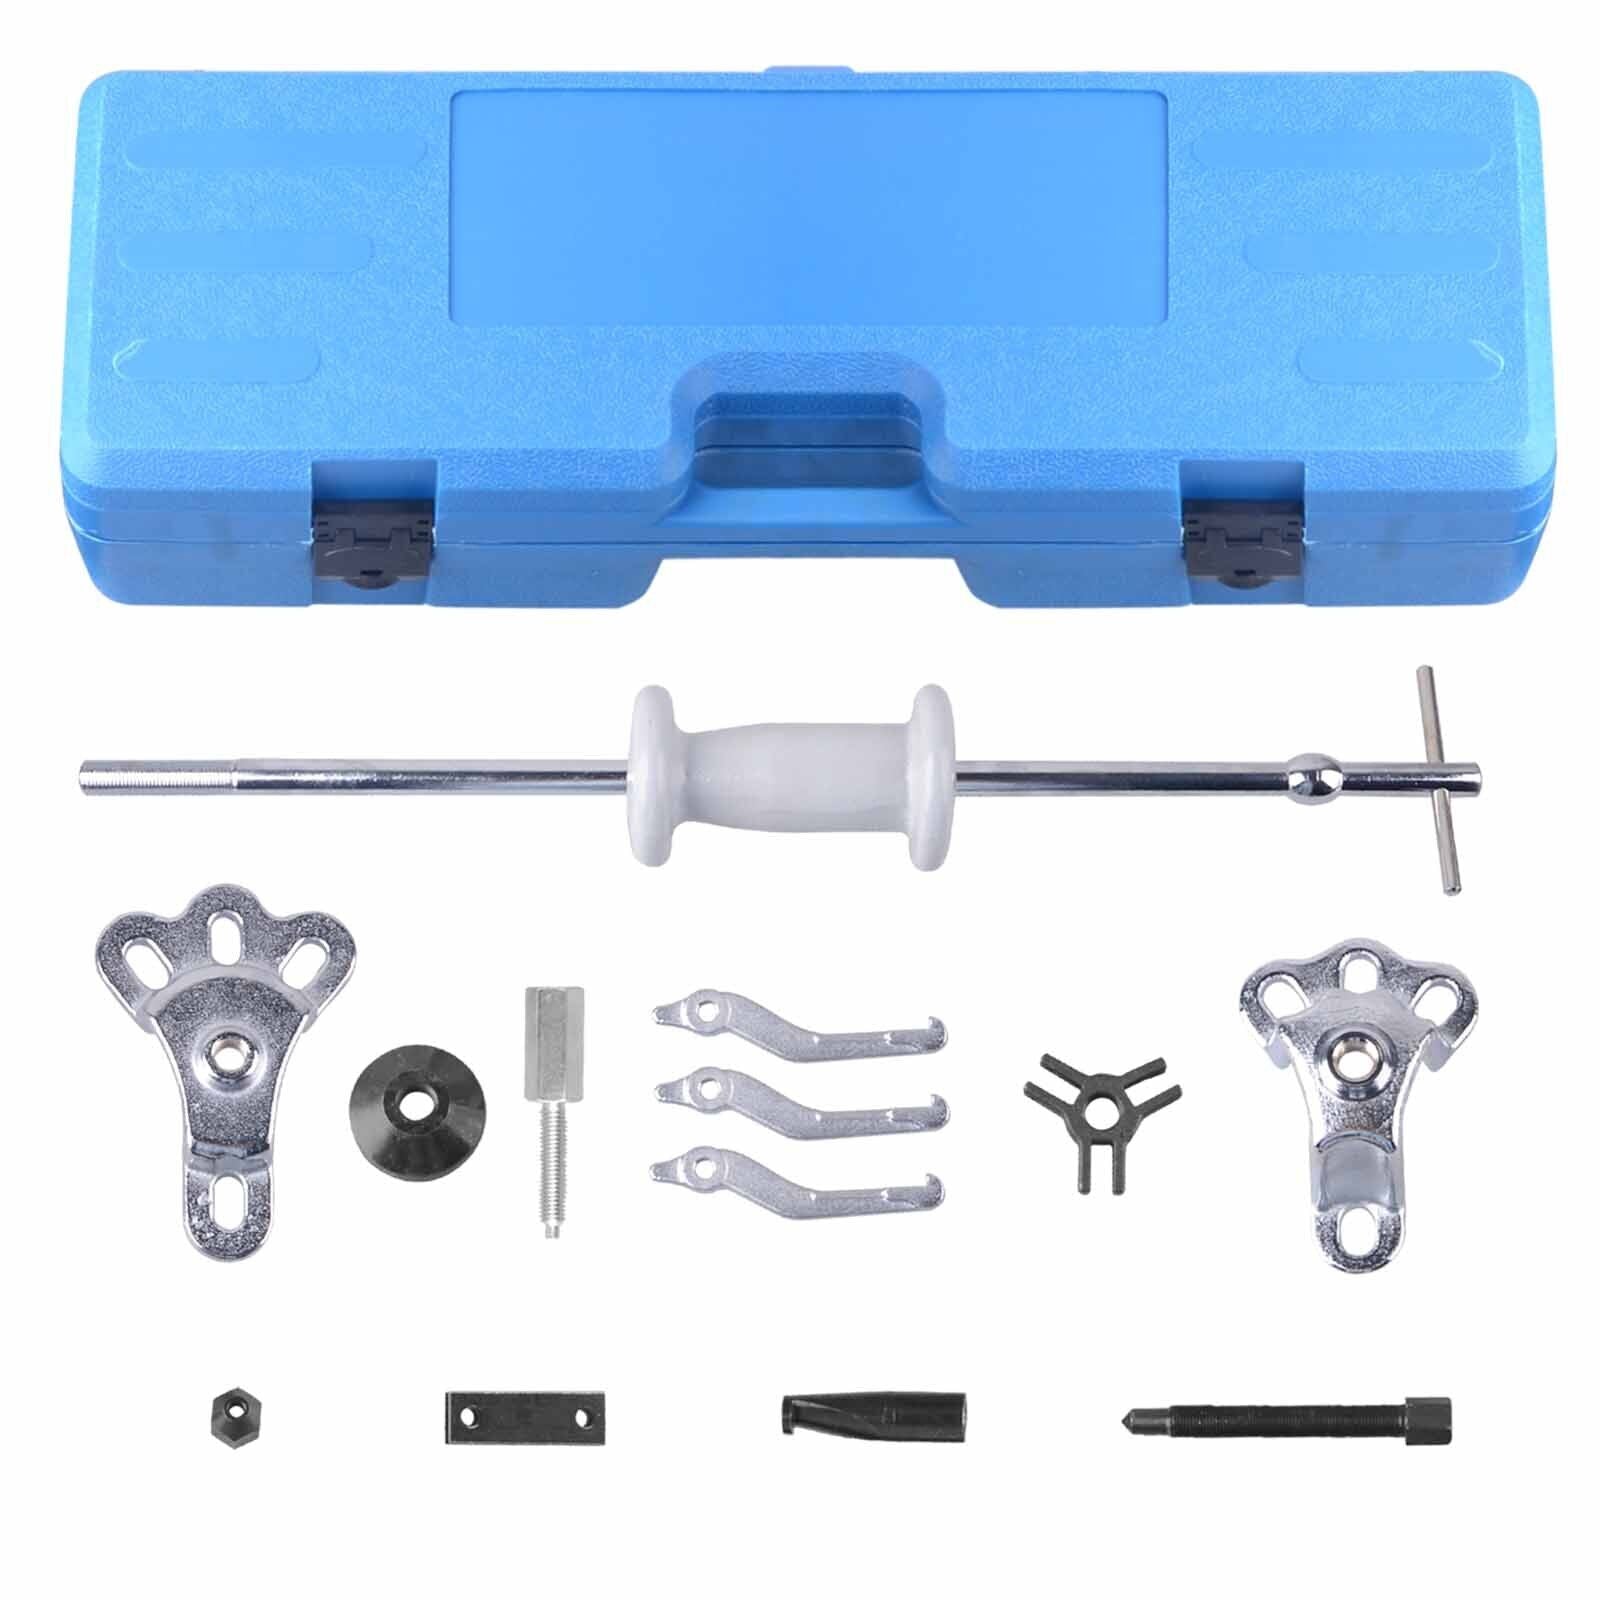 Hammer Dent Puller Tool Kit Wrench Adapter Axle Bearing